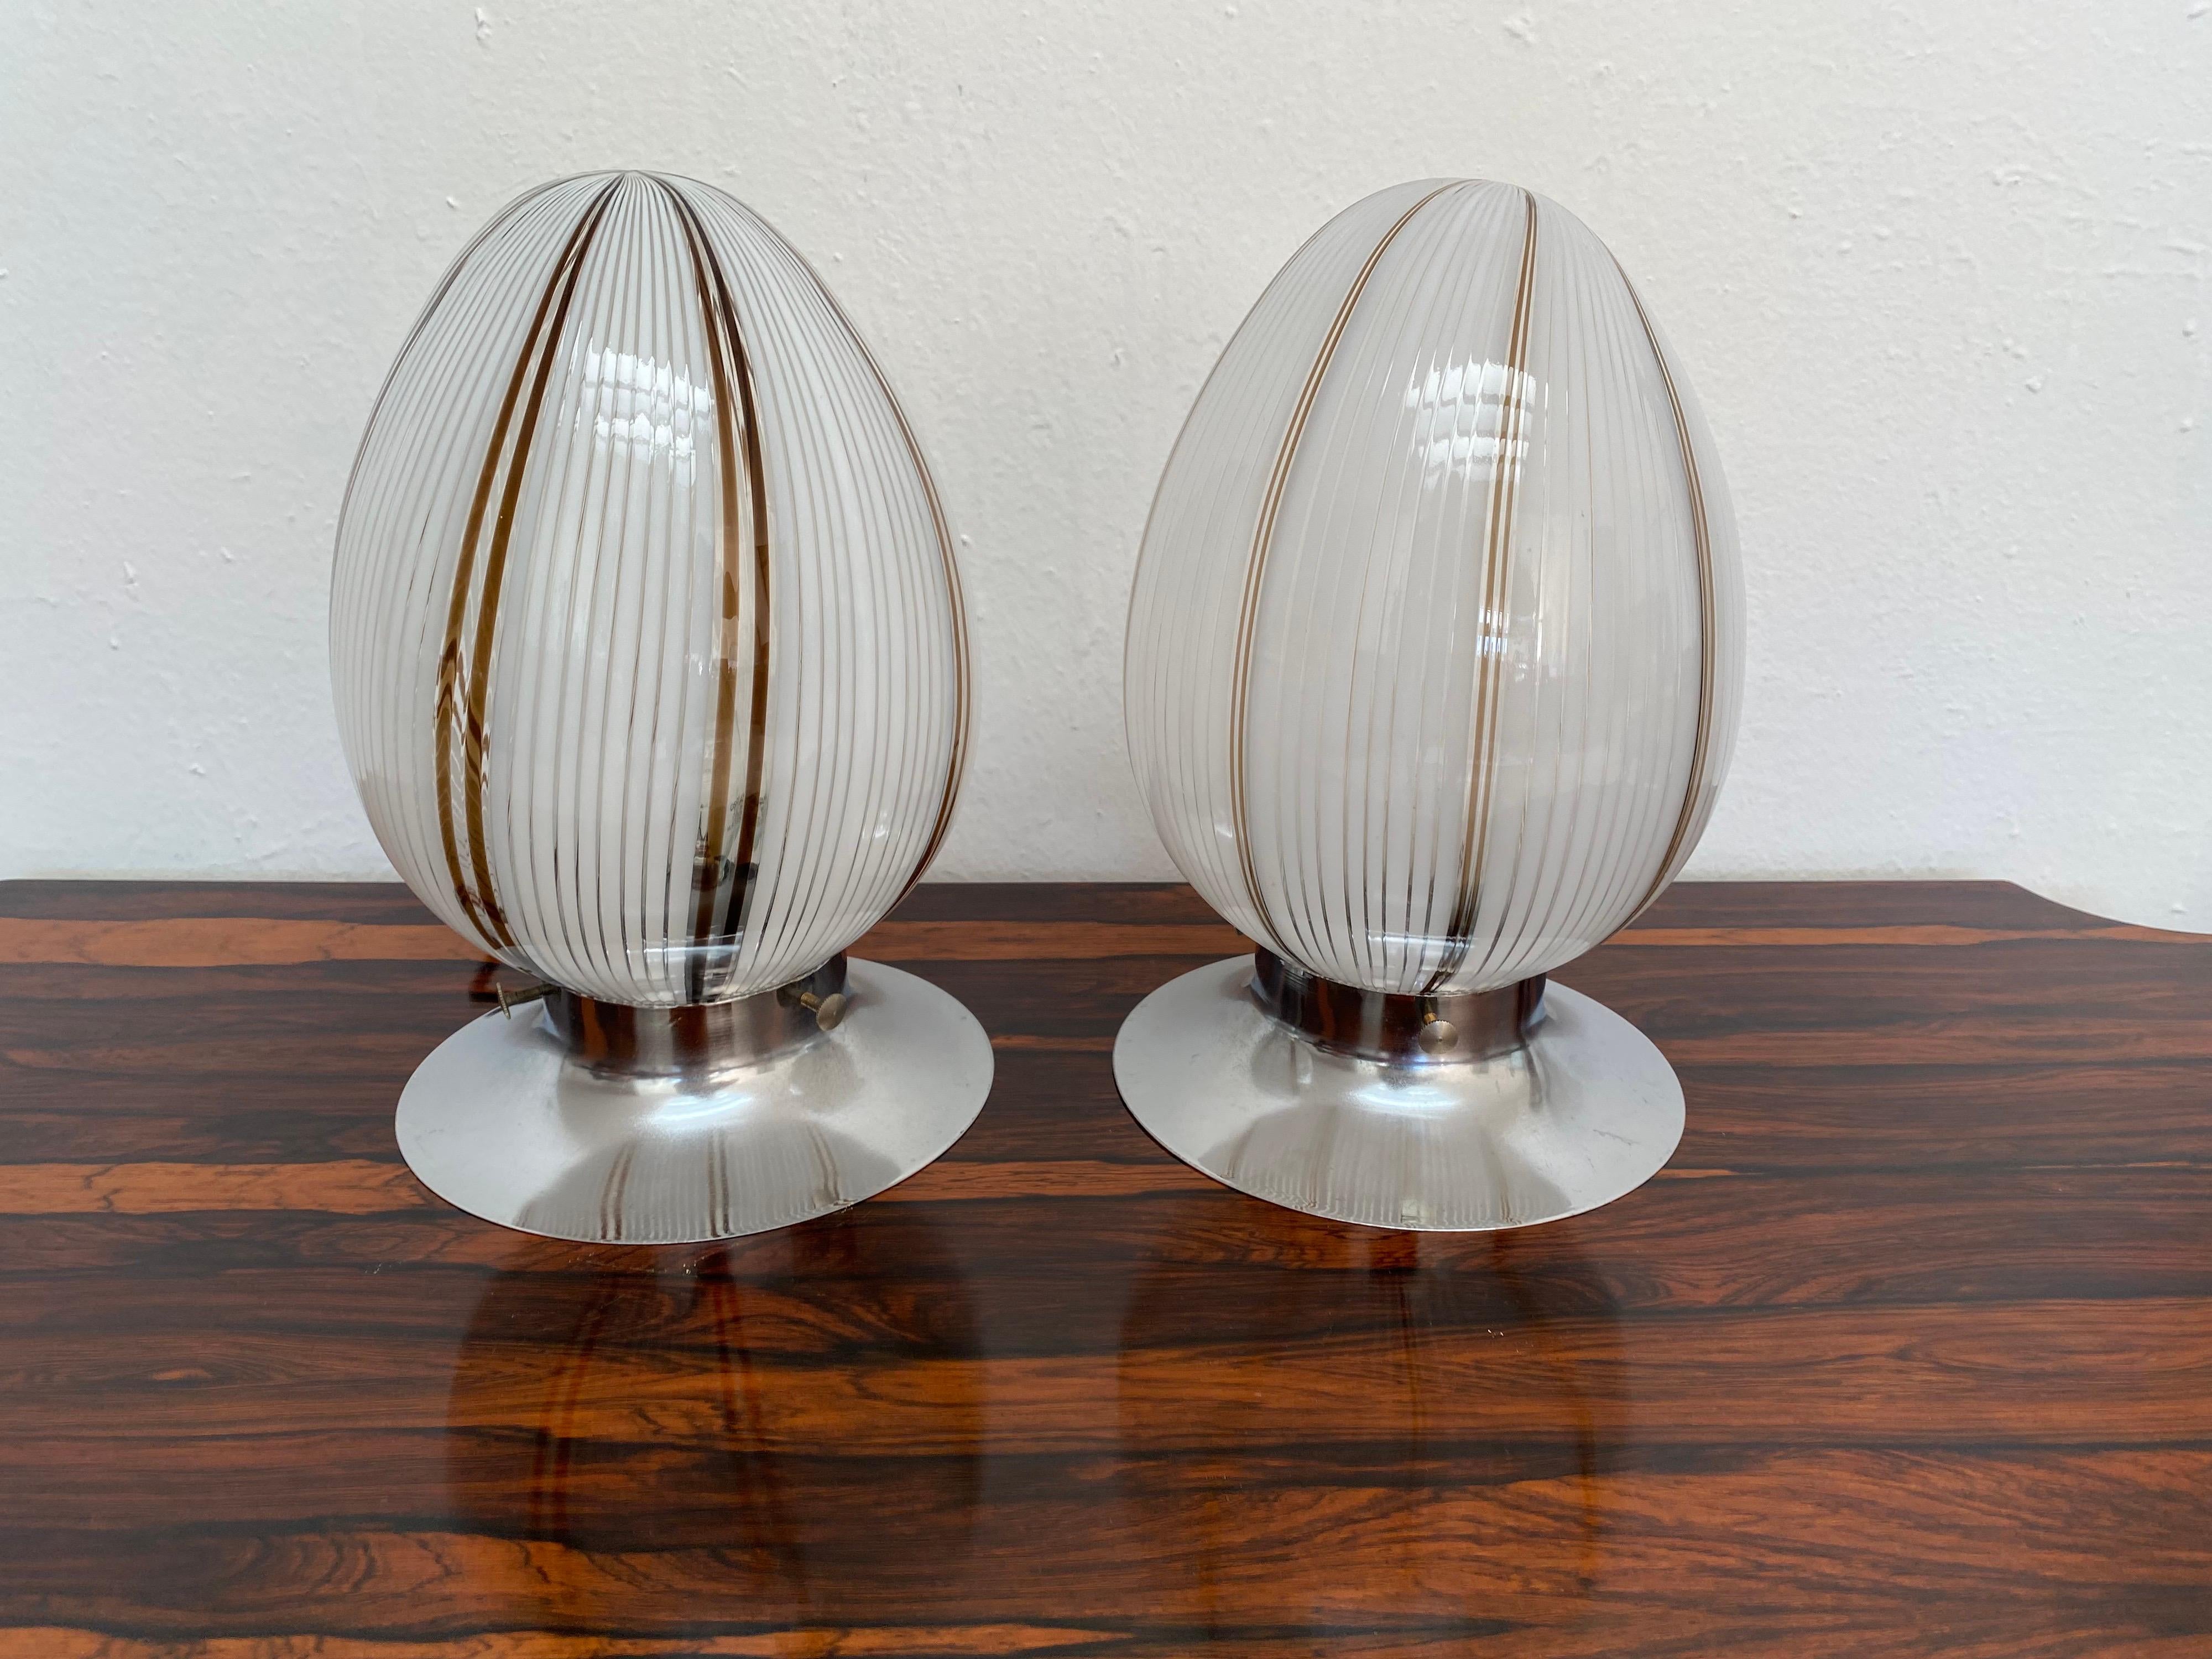 Murano Glass Pair of Mid-Century Modern Table Lamps Attributed to Venini, Murano, circa 1980 For Sale